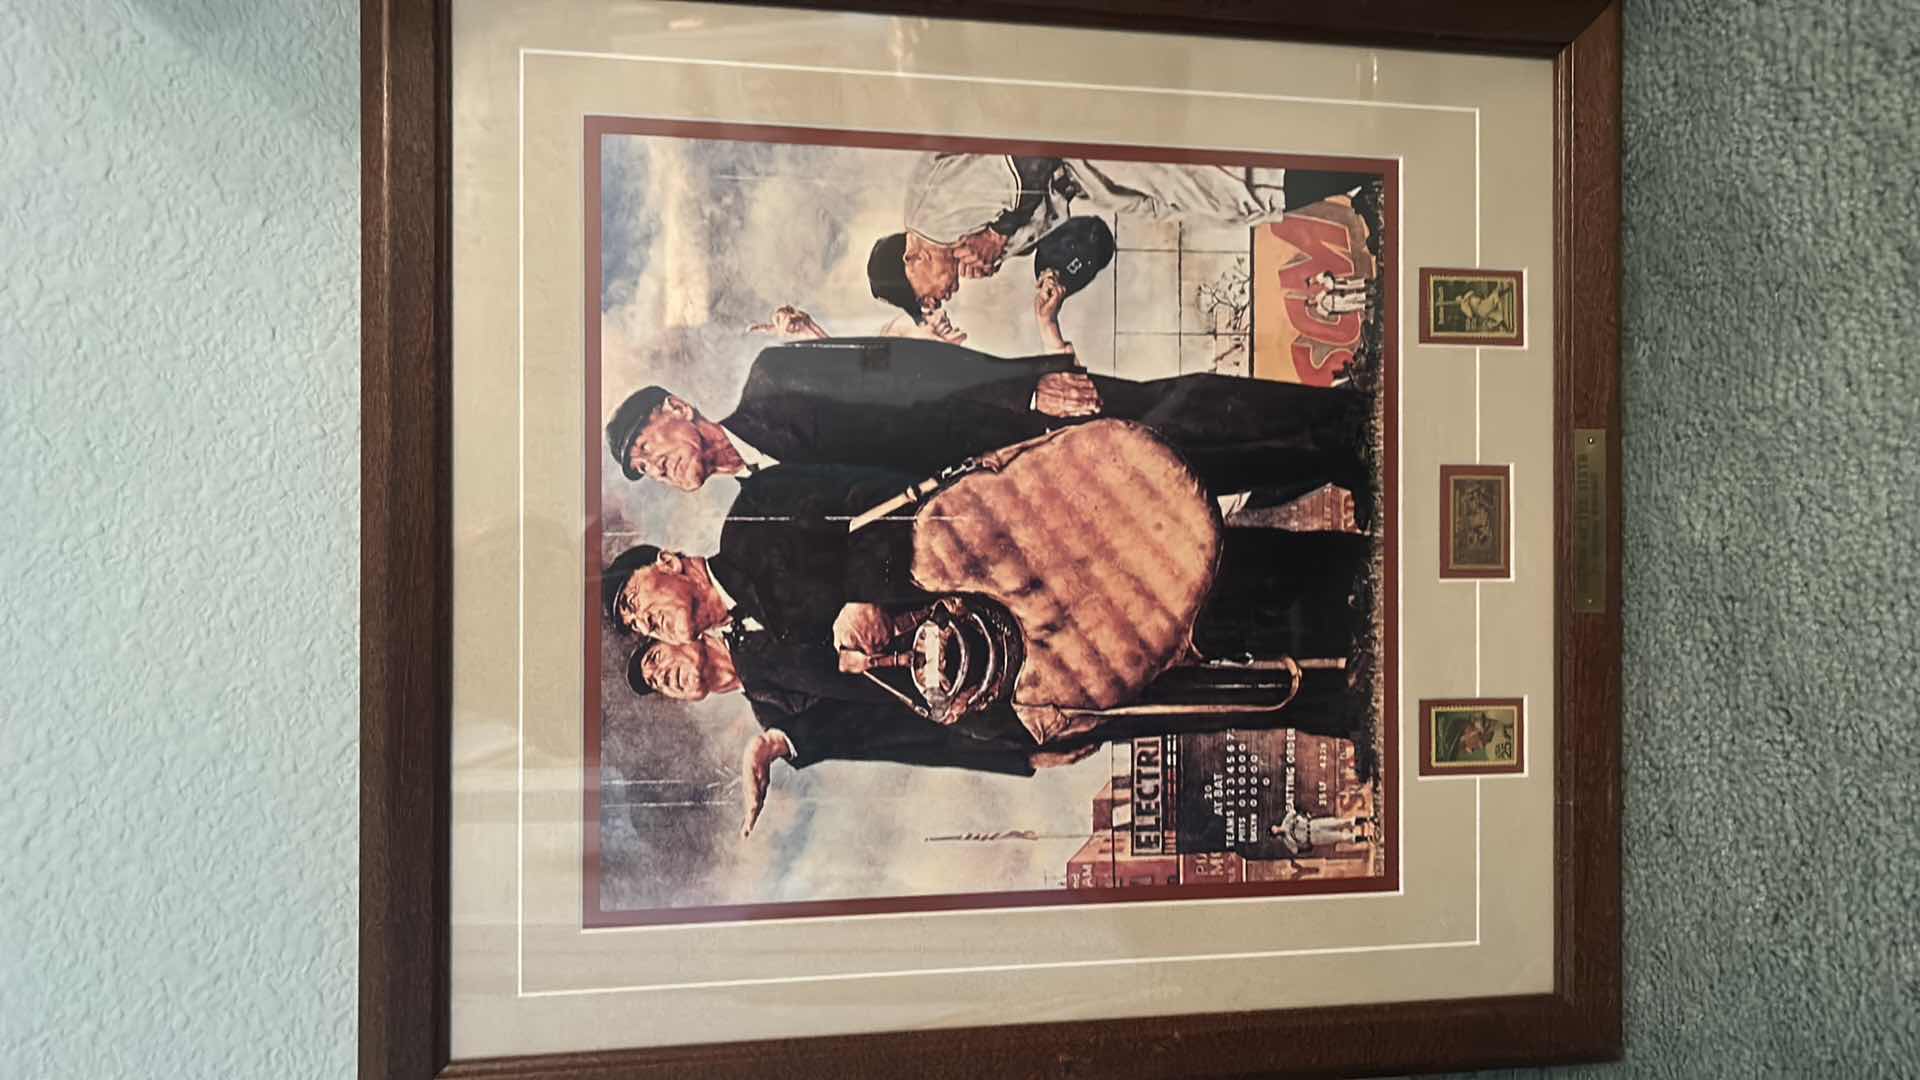 Photo 2 of “TOP OF THE 6th” NORMAN ROCKWELL WITH STAMPS, FRAMED ARTWORK 18” x 20”